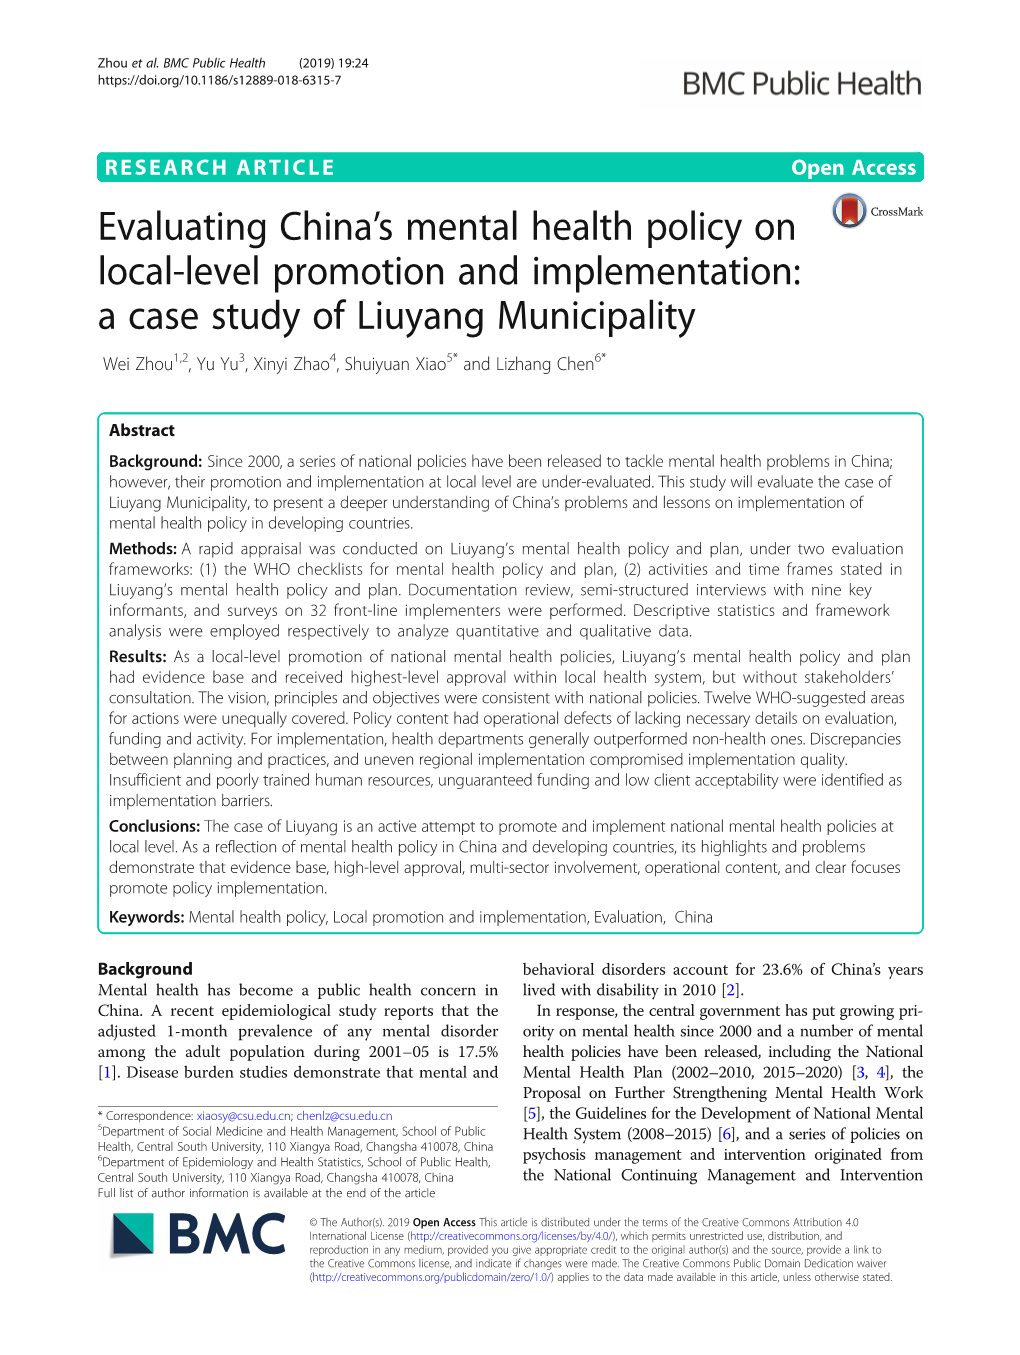 Evaluating China's Mental Health Policy on Local-Level Promotion and Implementation: a Case Study of Liuyang Municipality